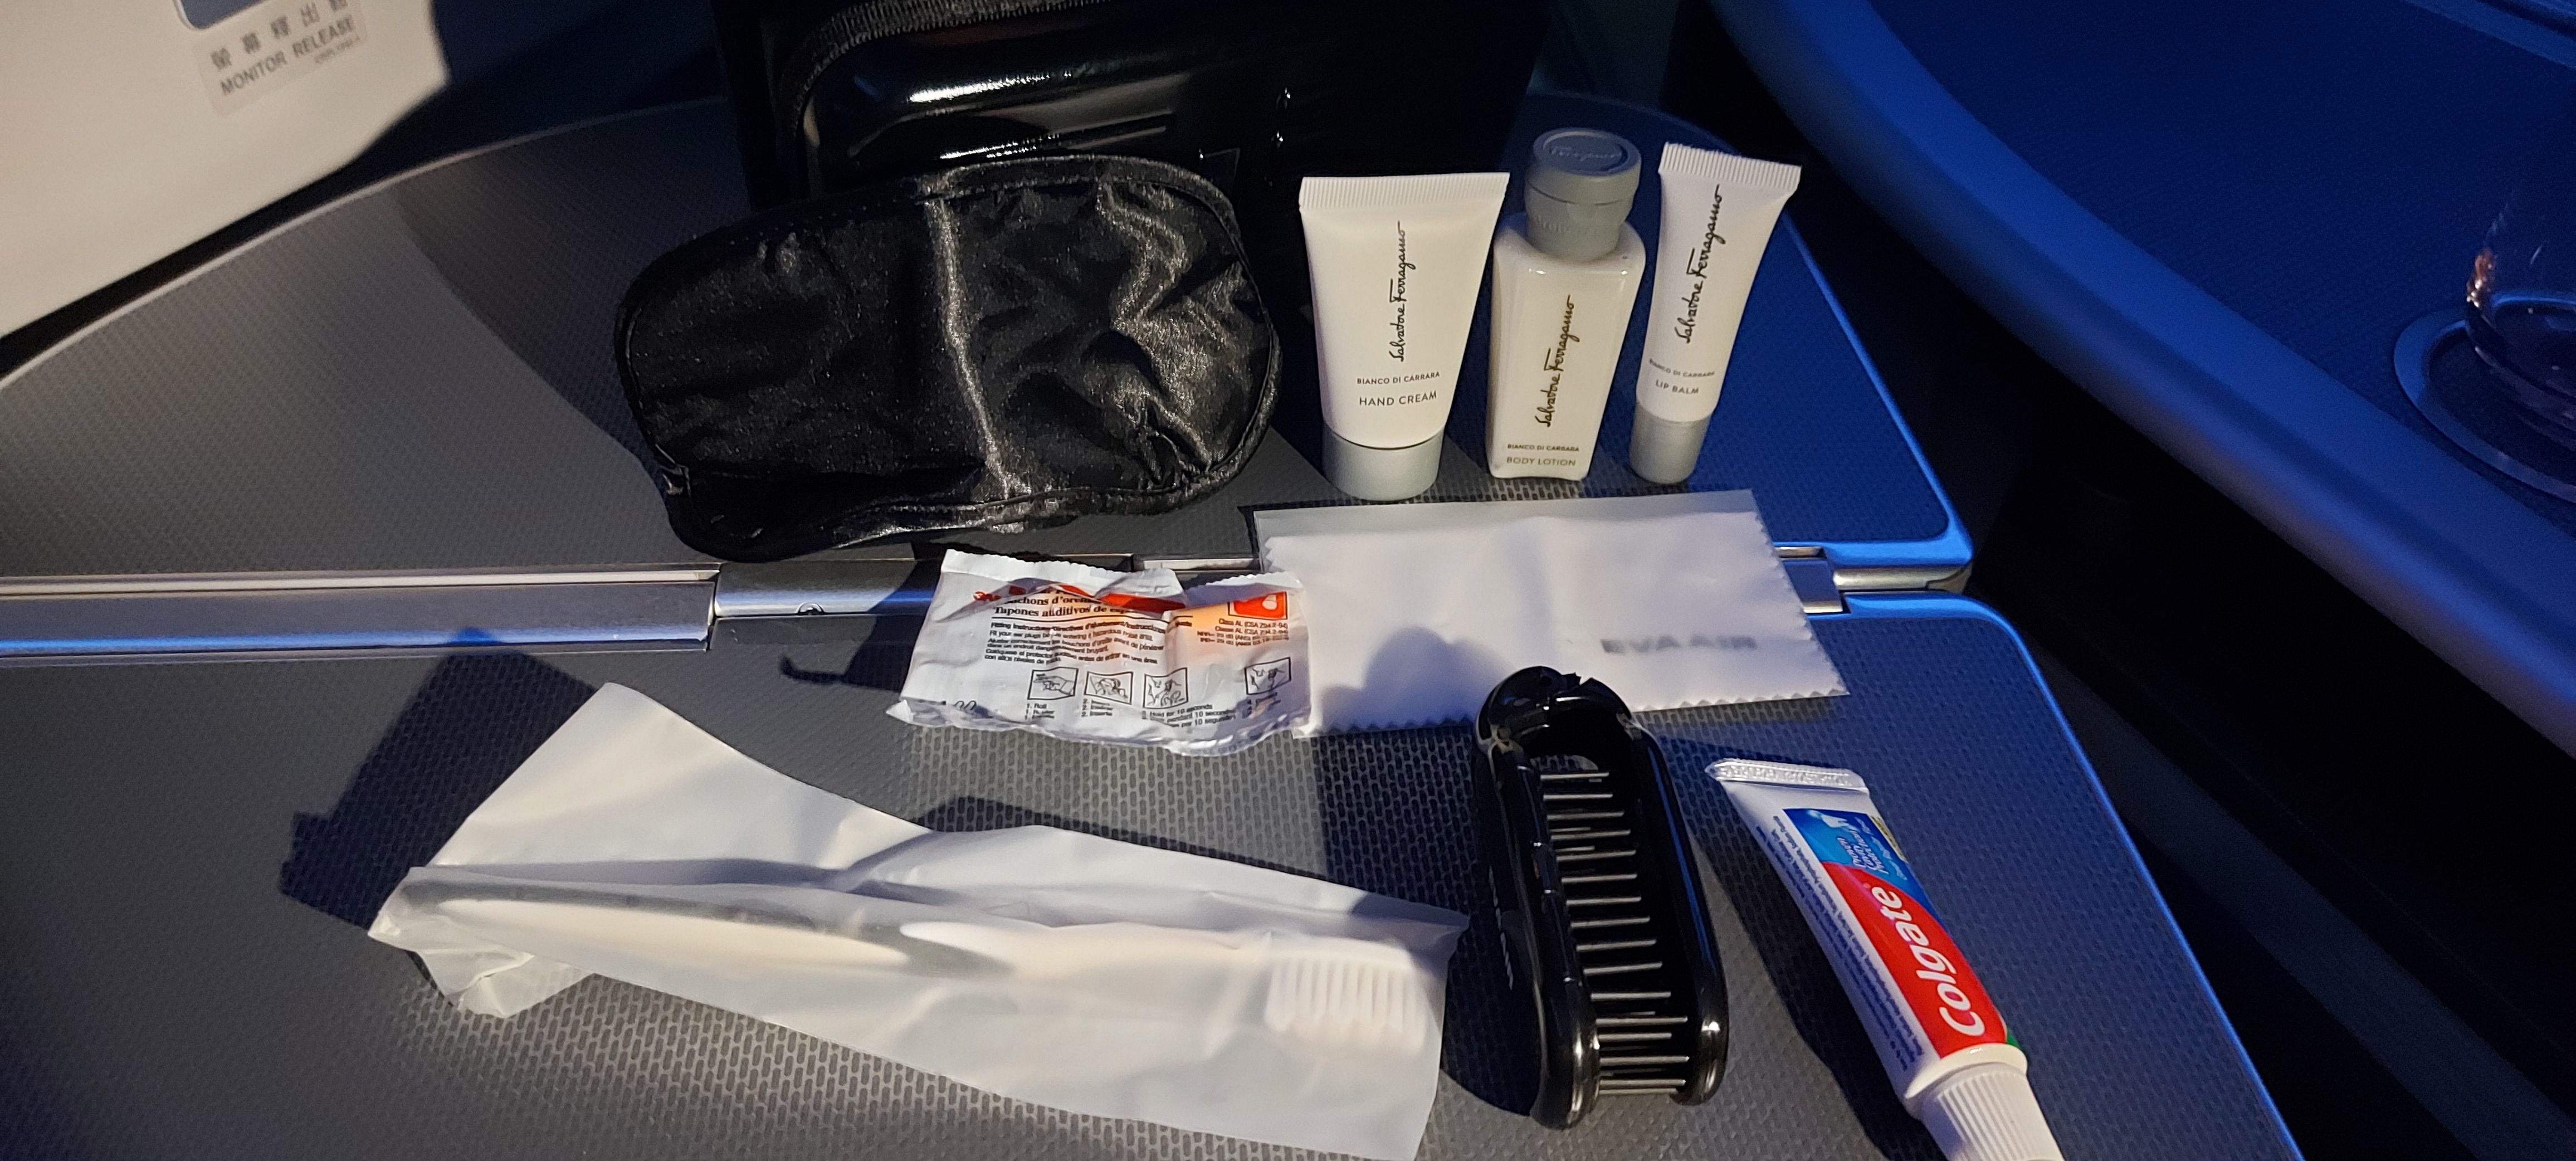 An EVA Air Business Class Amenity Kit with contents on the tray table.